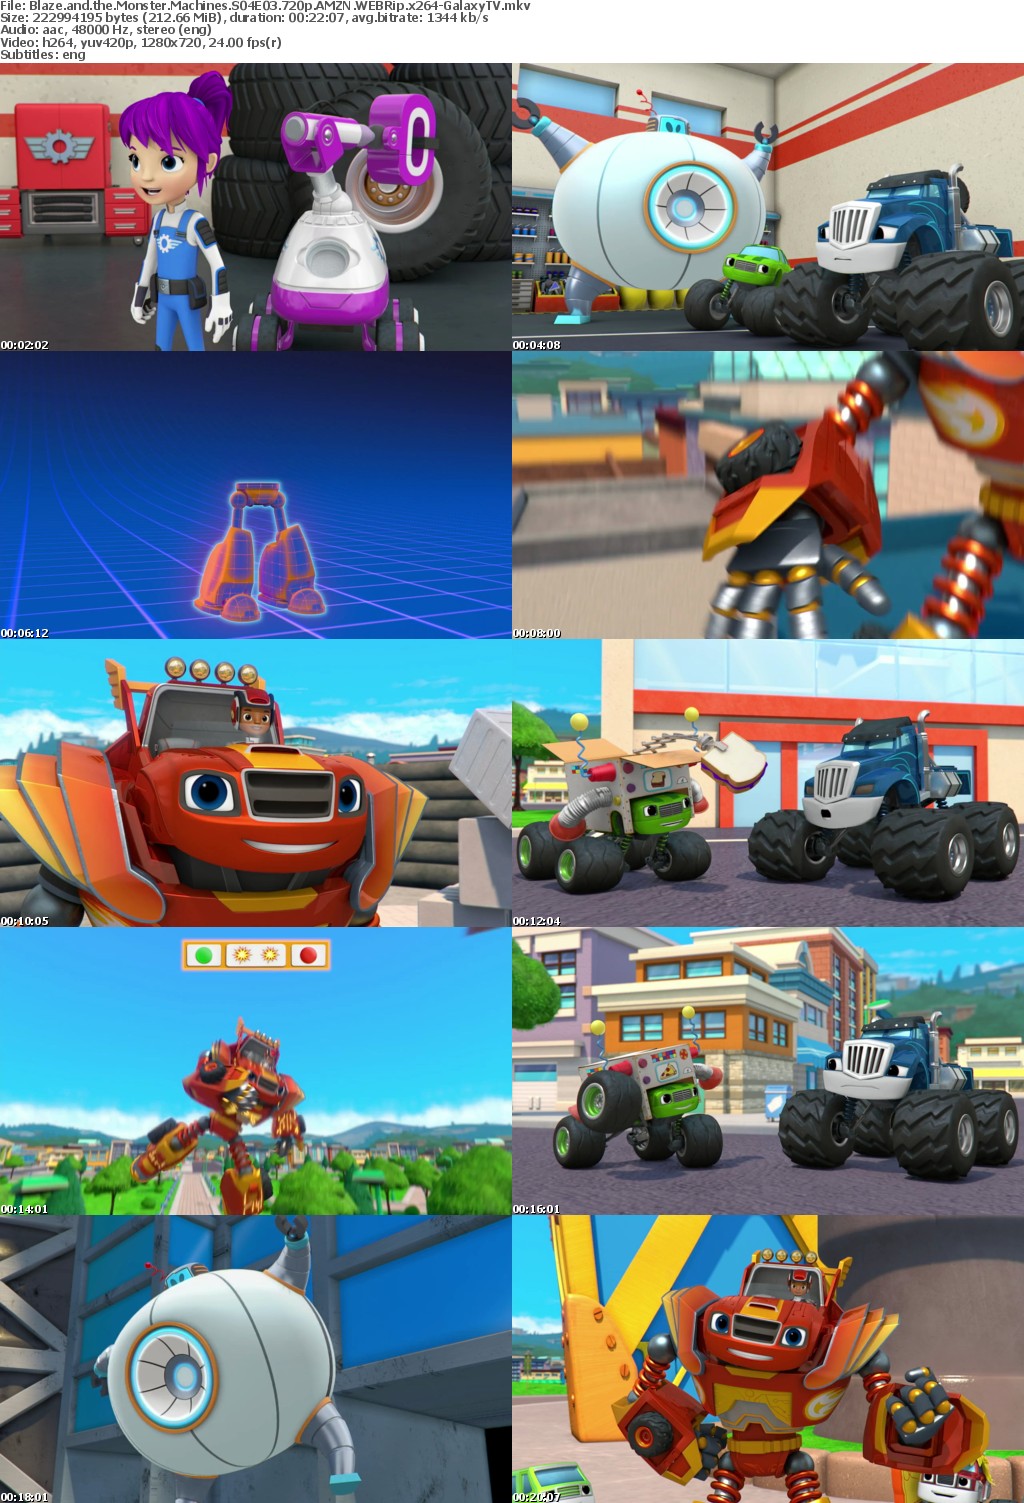 Blaze and the Monster Machines S04 COMPLETE 720p AMZN WEBRip x264-GalaxyTV